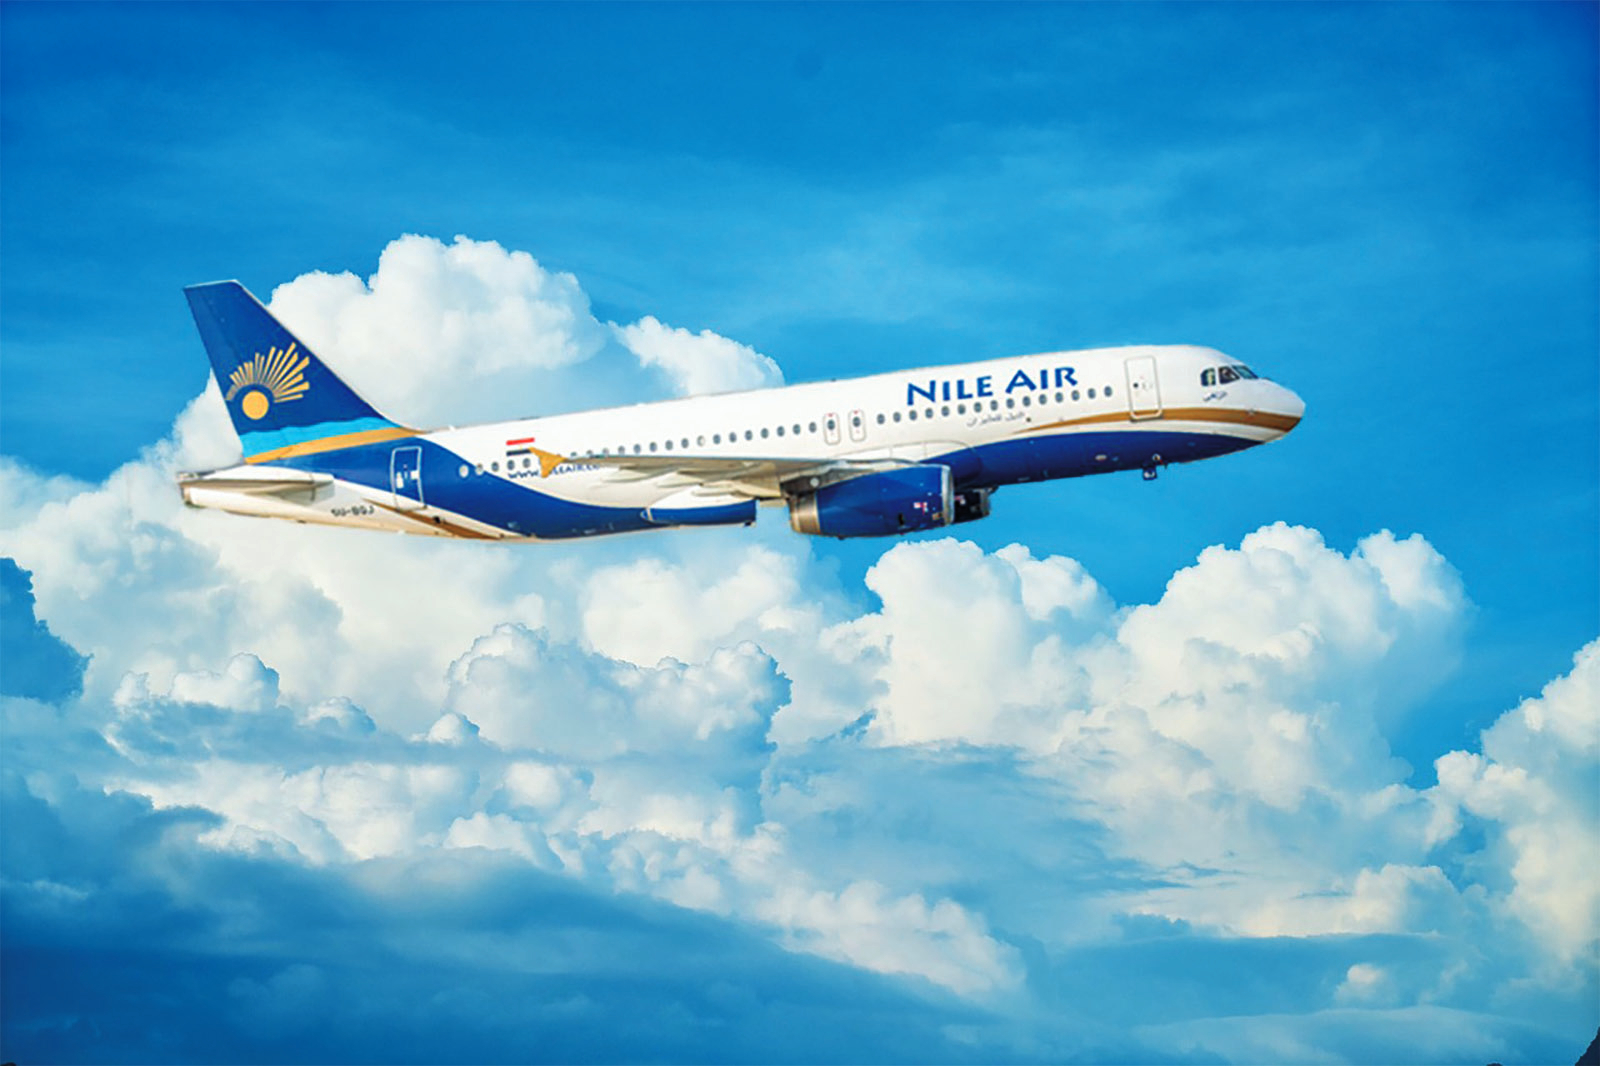 Nile Air operates new flights from Milan Malpensa, Italy, to Egypt